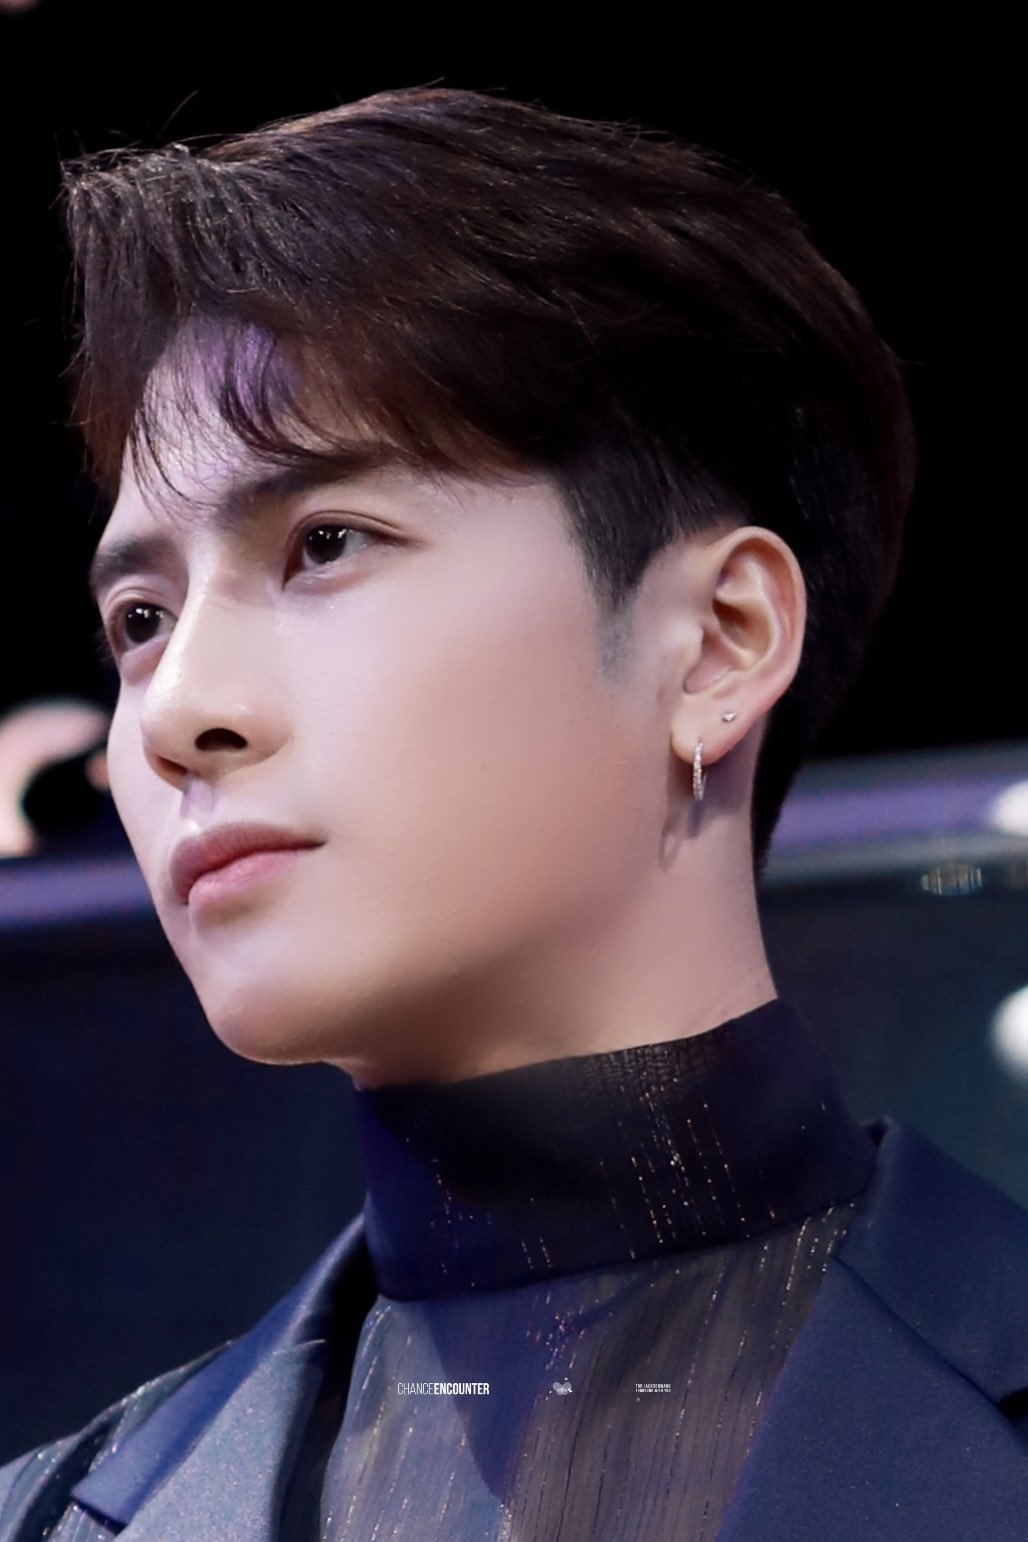 Jackson Wang reveals type of “beautiful hair”, sharing special moments in  the “PANTENE BEST HAIR with Jackson Wang” event to celebrate healthy hair  with Pantene.